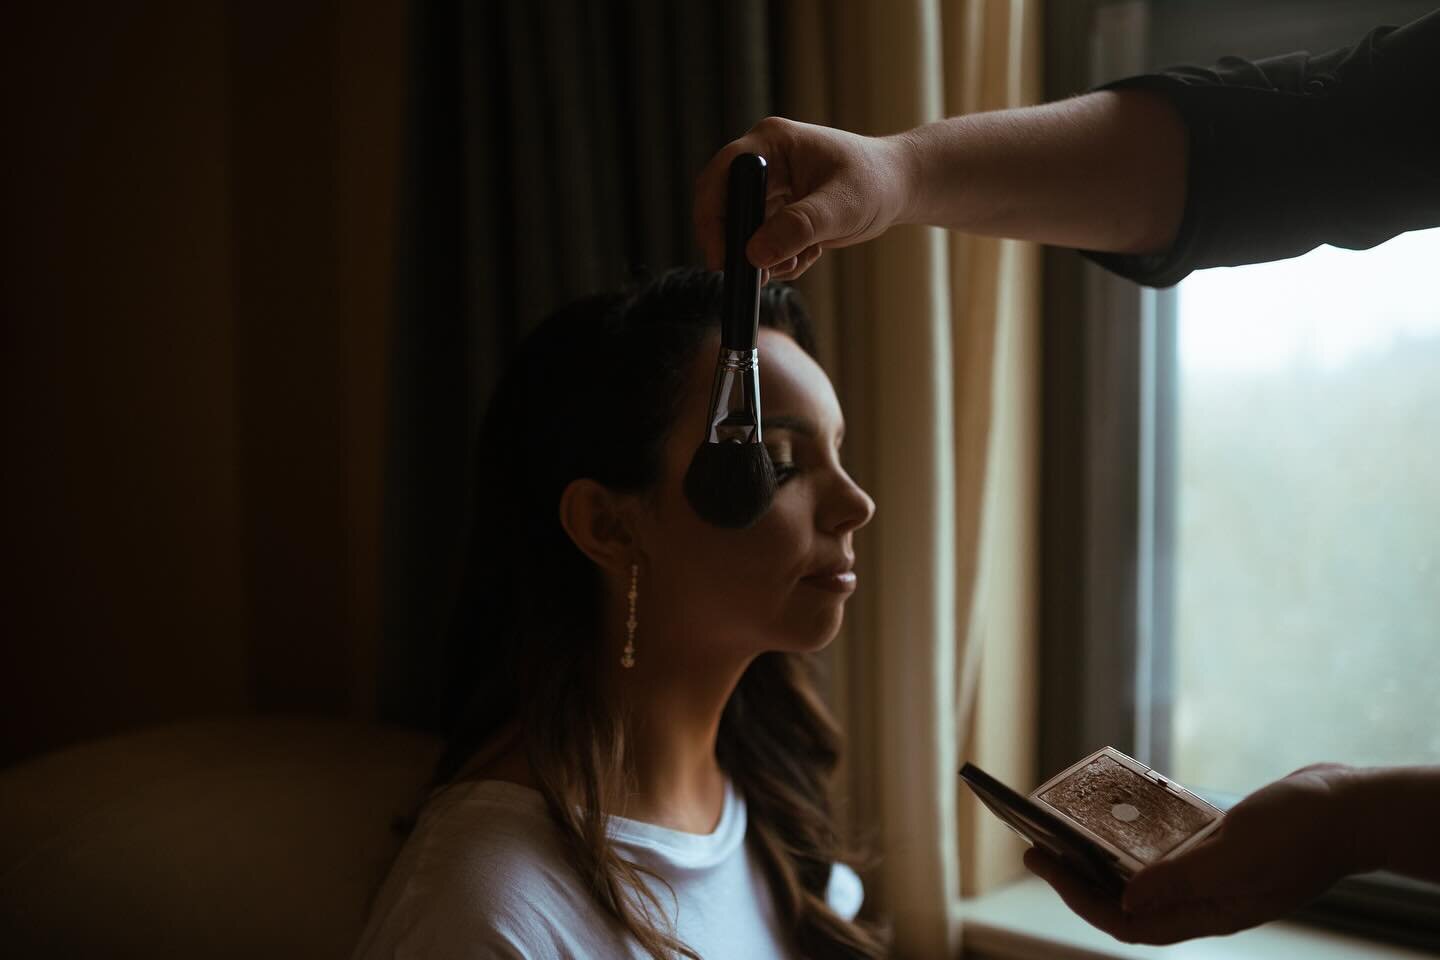 one of my favorite getting ready photos of all time 🖤

#microweddingphotographer #smallwedding #midwestelopementphotographer #stlweddingphotographer #chicagoweddingphotographer